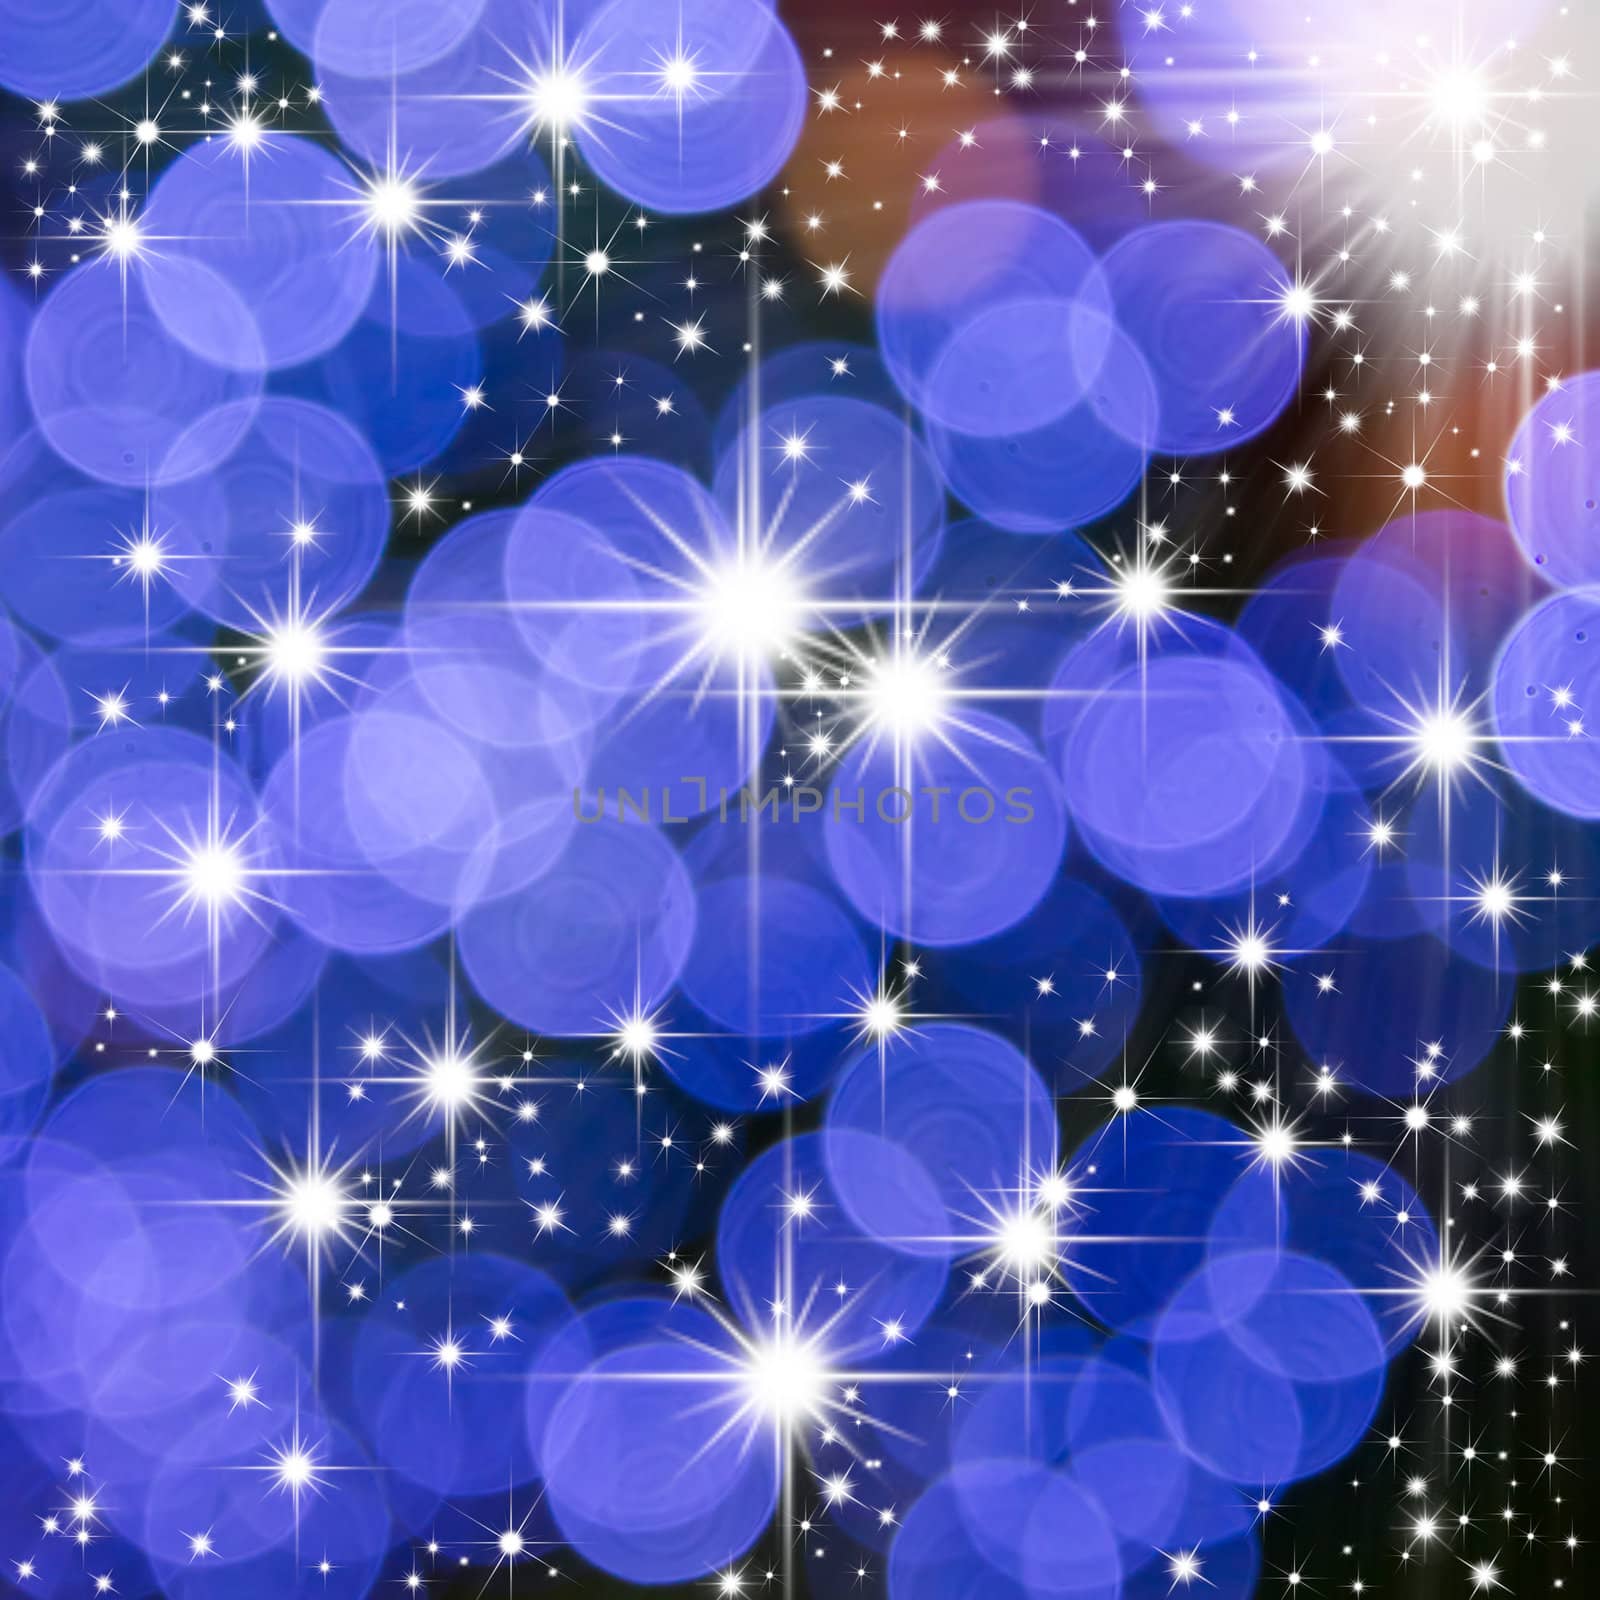 bright star and purple round light for web background